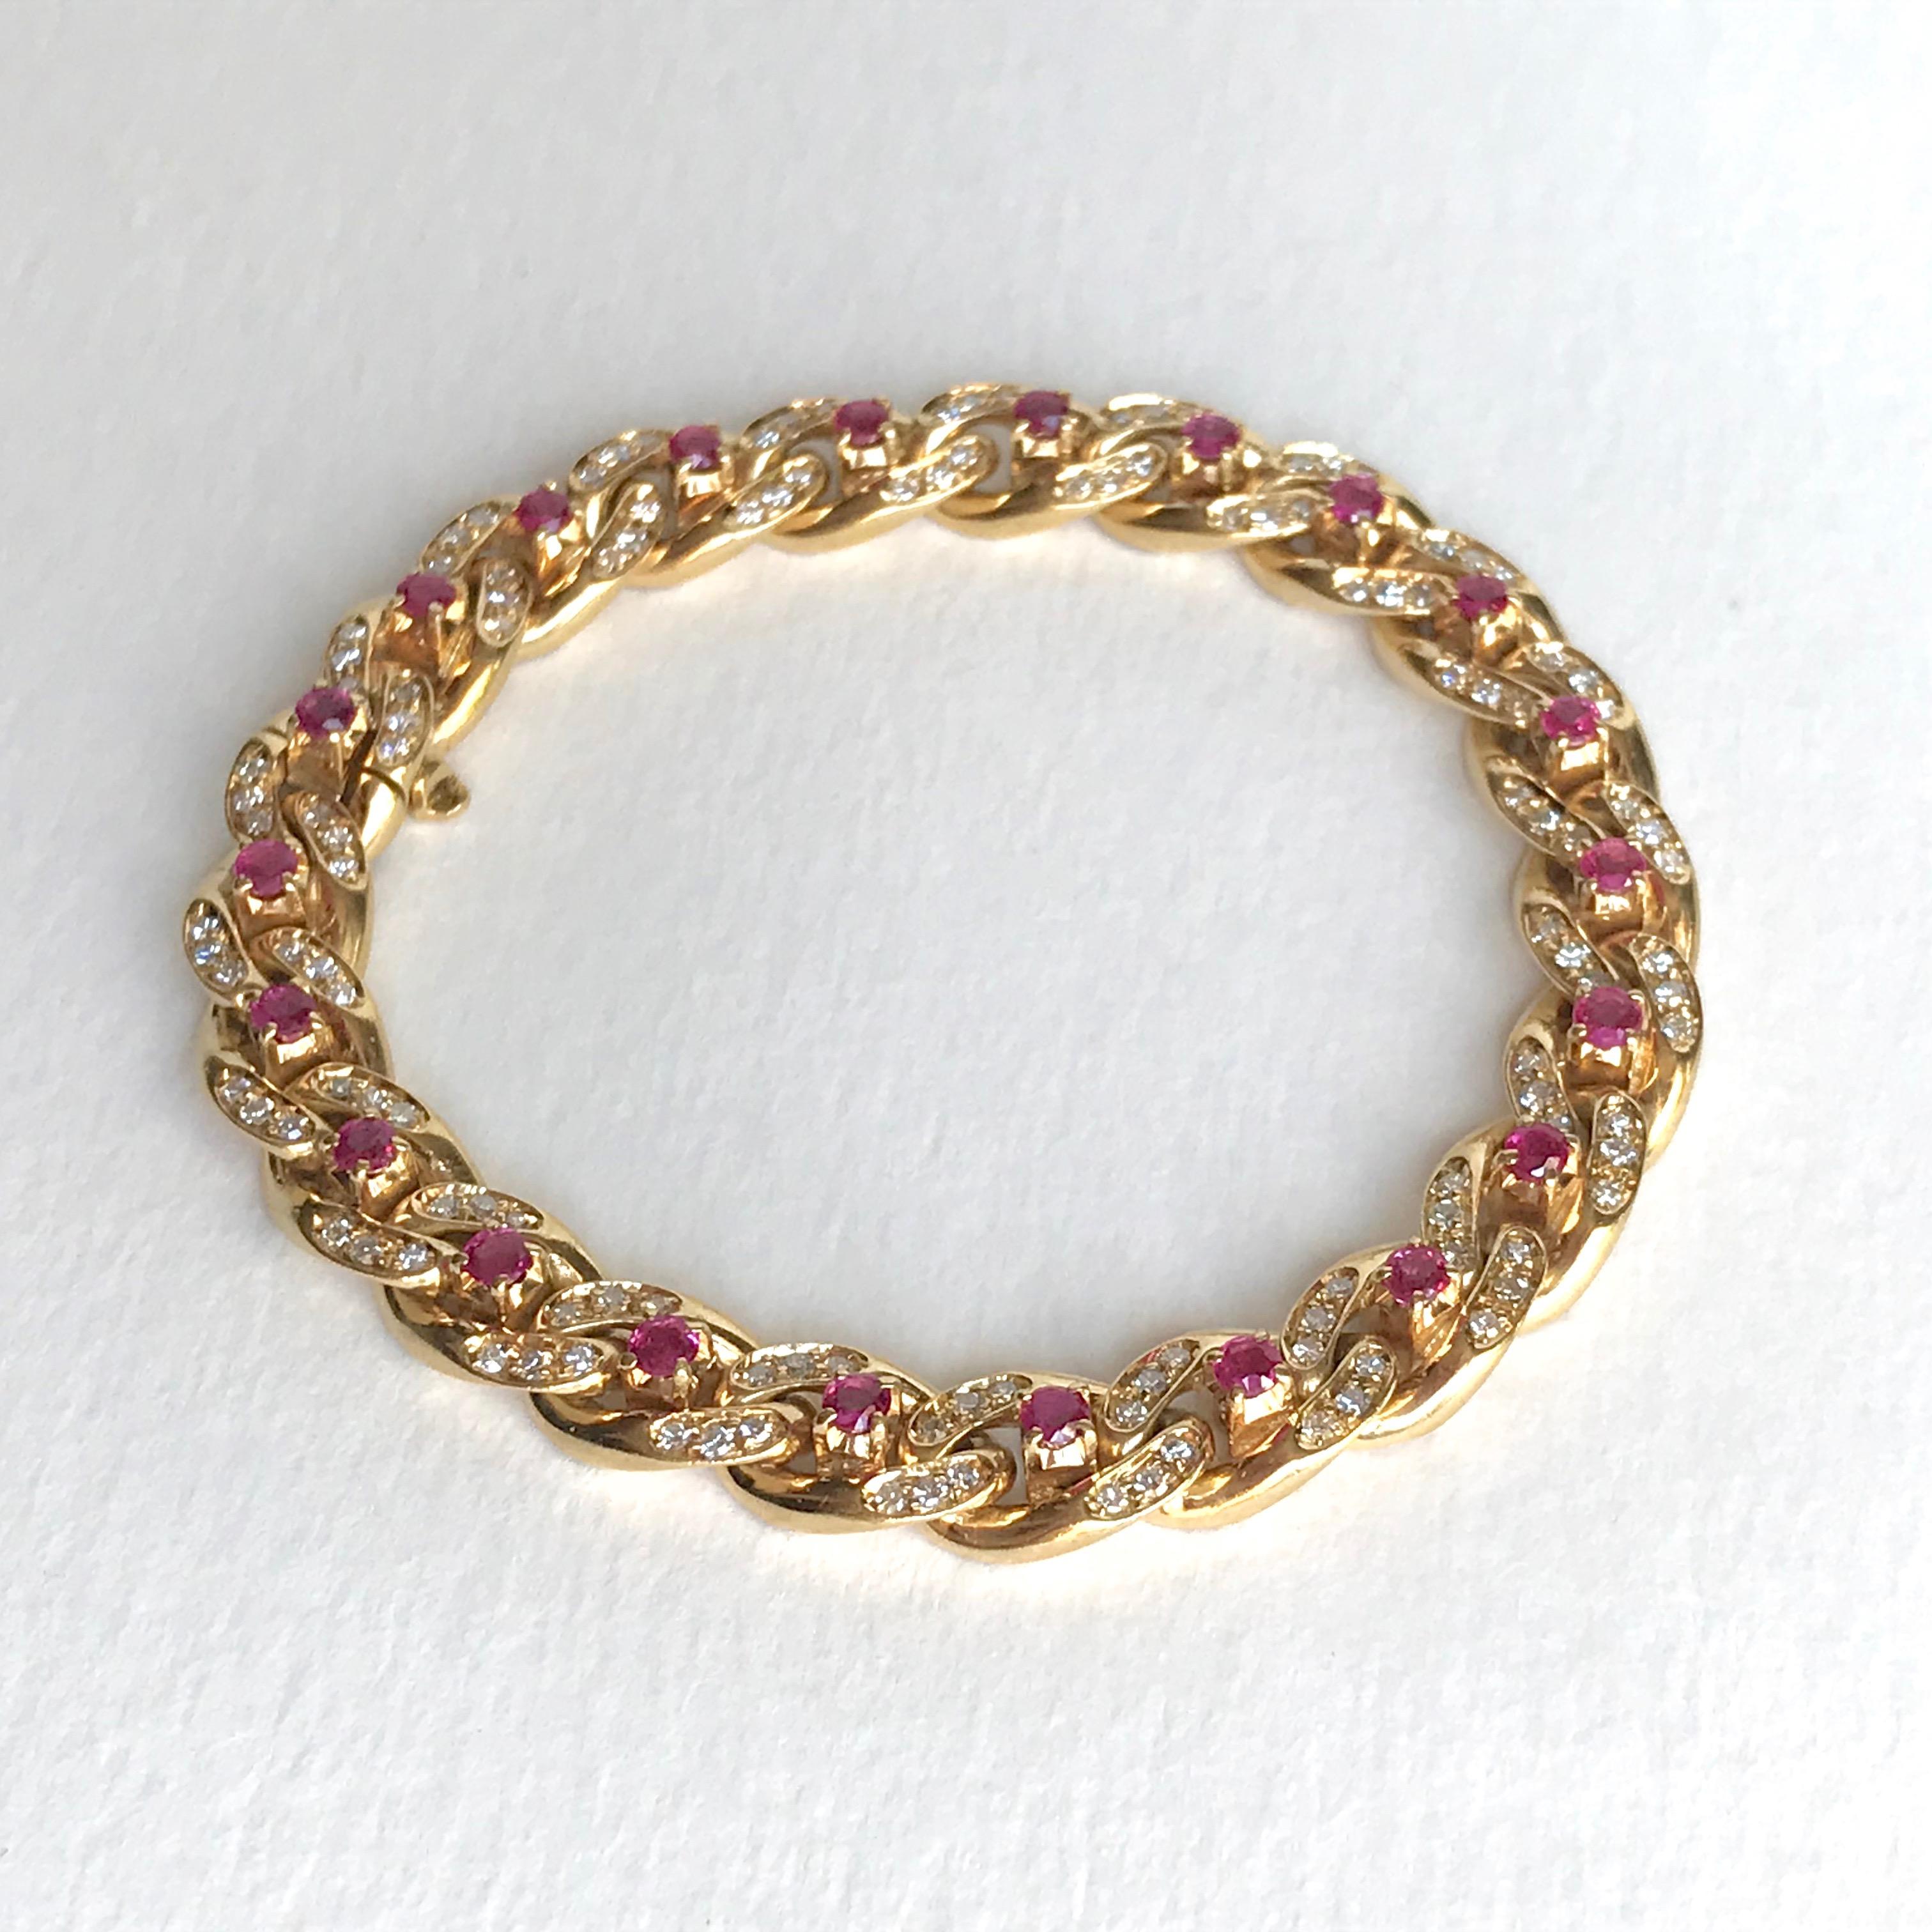 Cartier 18k yellow Gold Gourmet Link Bracelet with 22 Rubies and 132 Diamonds. 
Each link is set with 1 ruby and 6 Diamonds.
With Security. Signed Cartier and Numbered. Hallmark of Eagle. French work.
Gross Weight: 41.4g 
Length: 18cm Width: 0.8cm